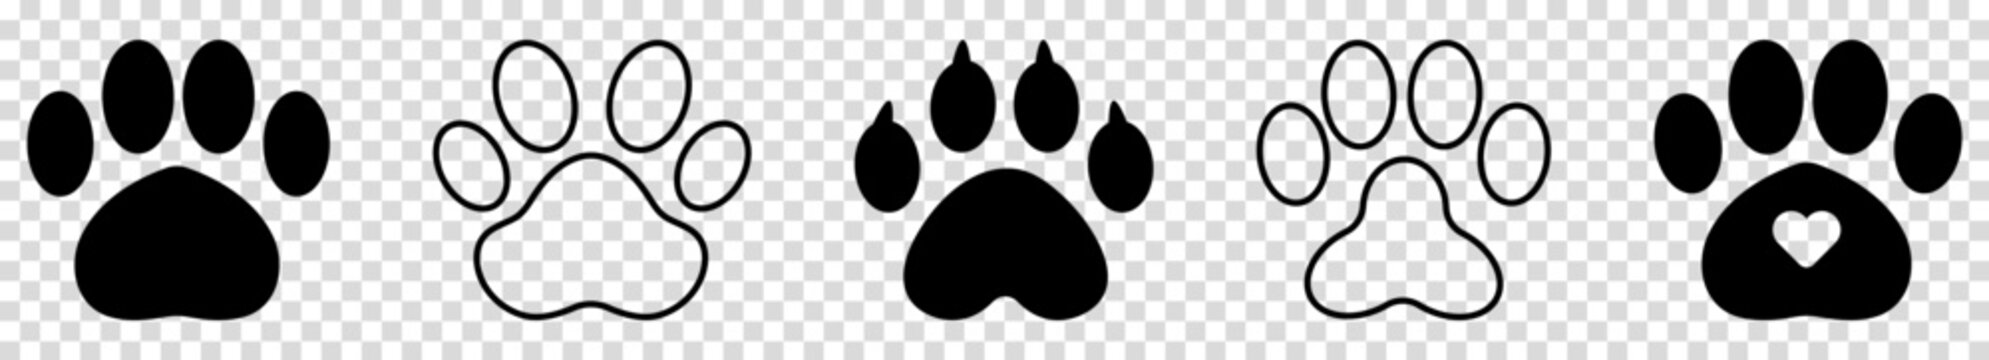 Dog or cat paw icons. Vector illustration isolated on transparent background